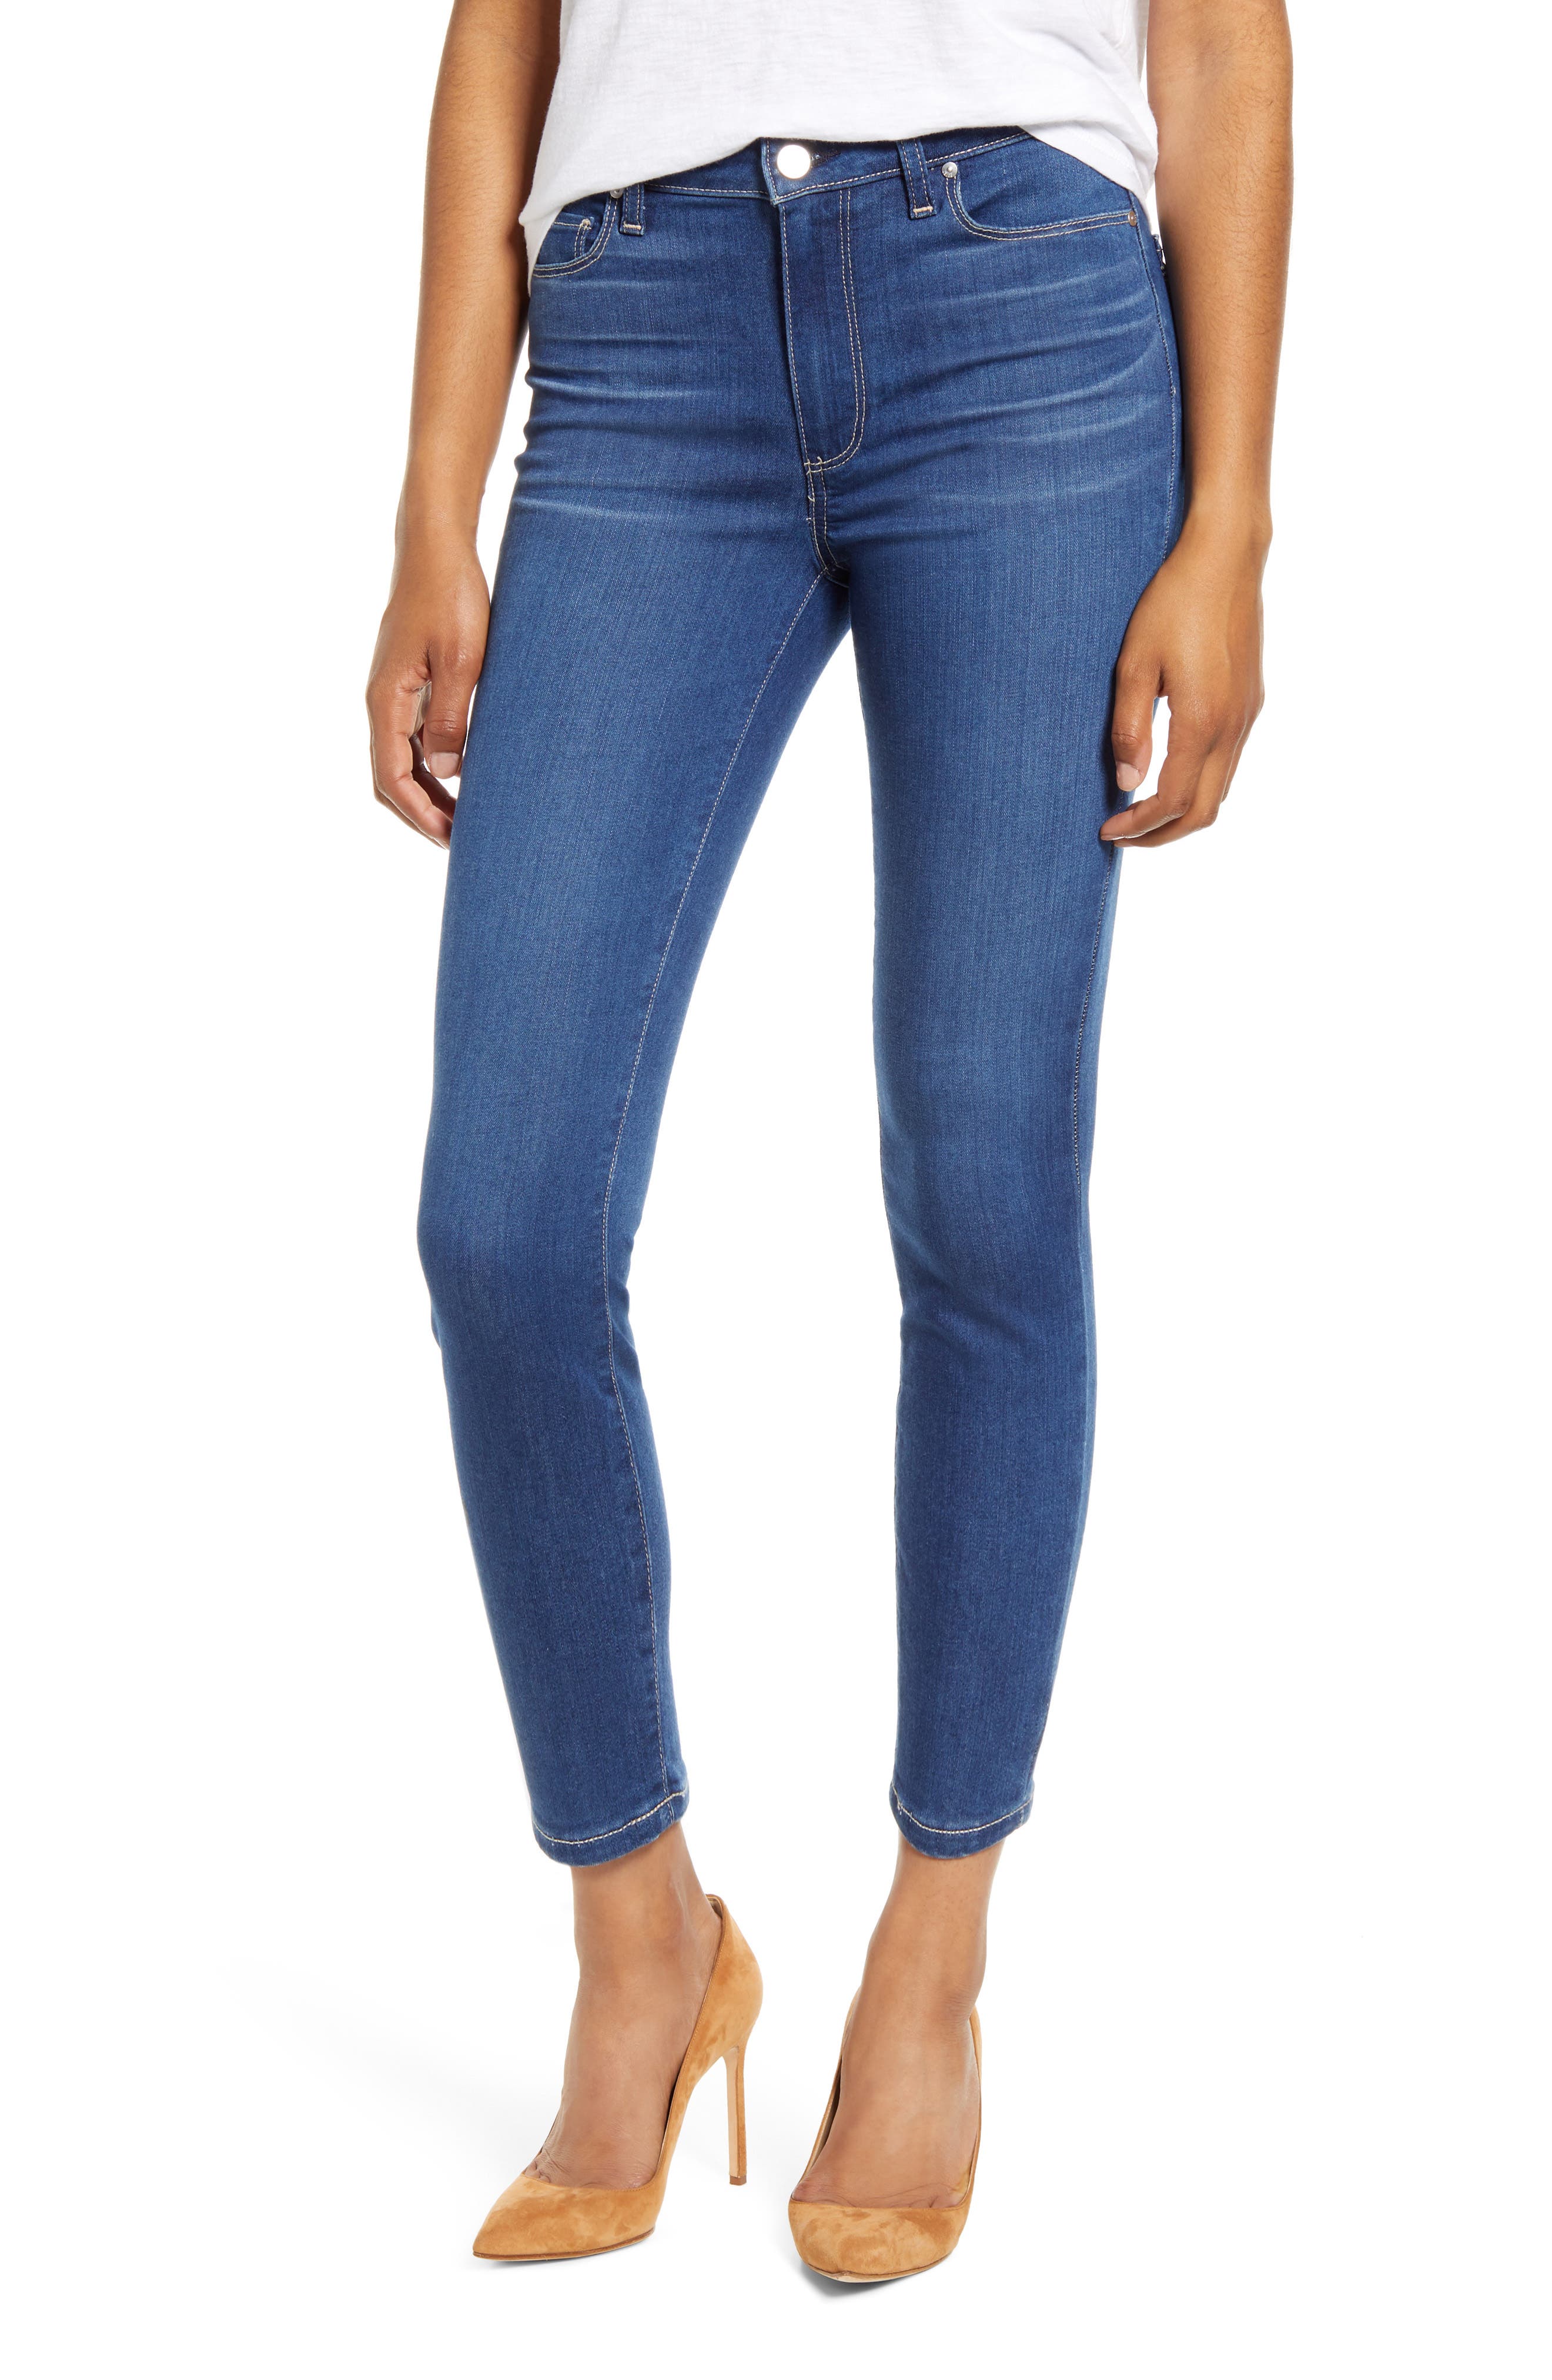 PAIGE HOXTON ULTRA SKINNY JEANS,190161578248